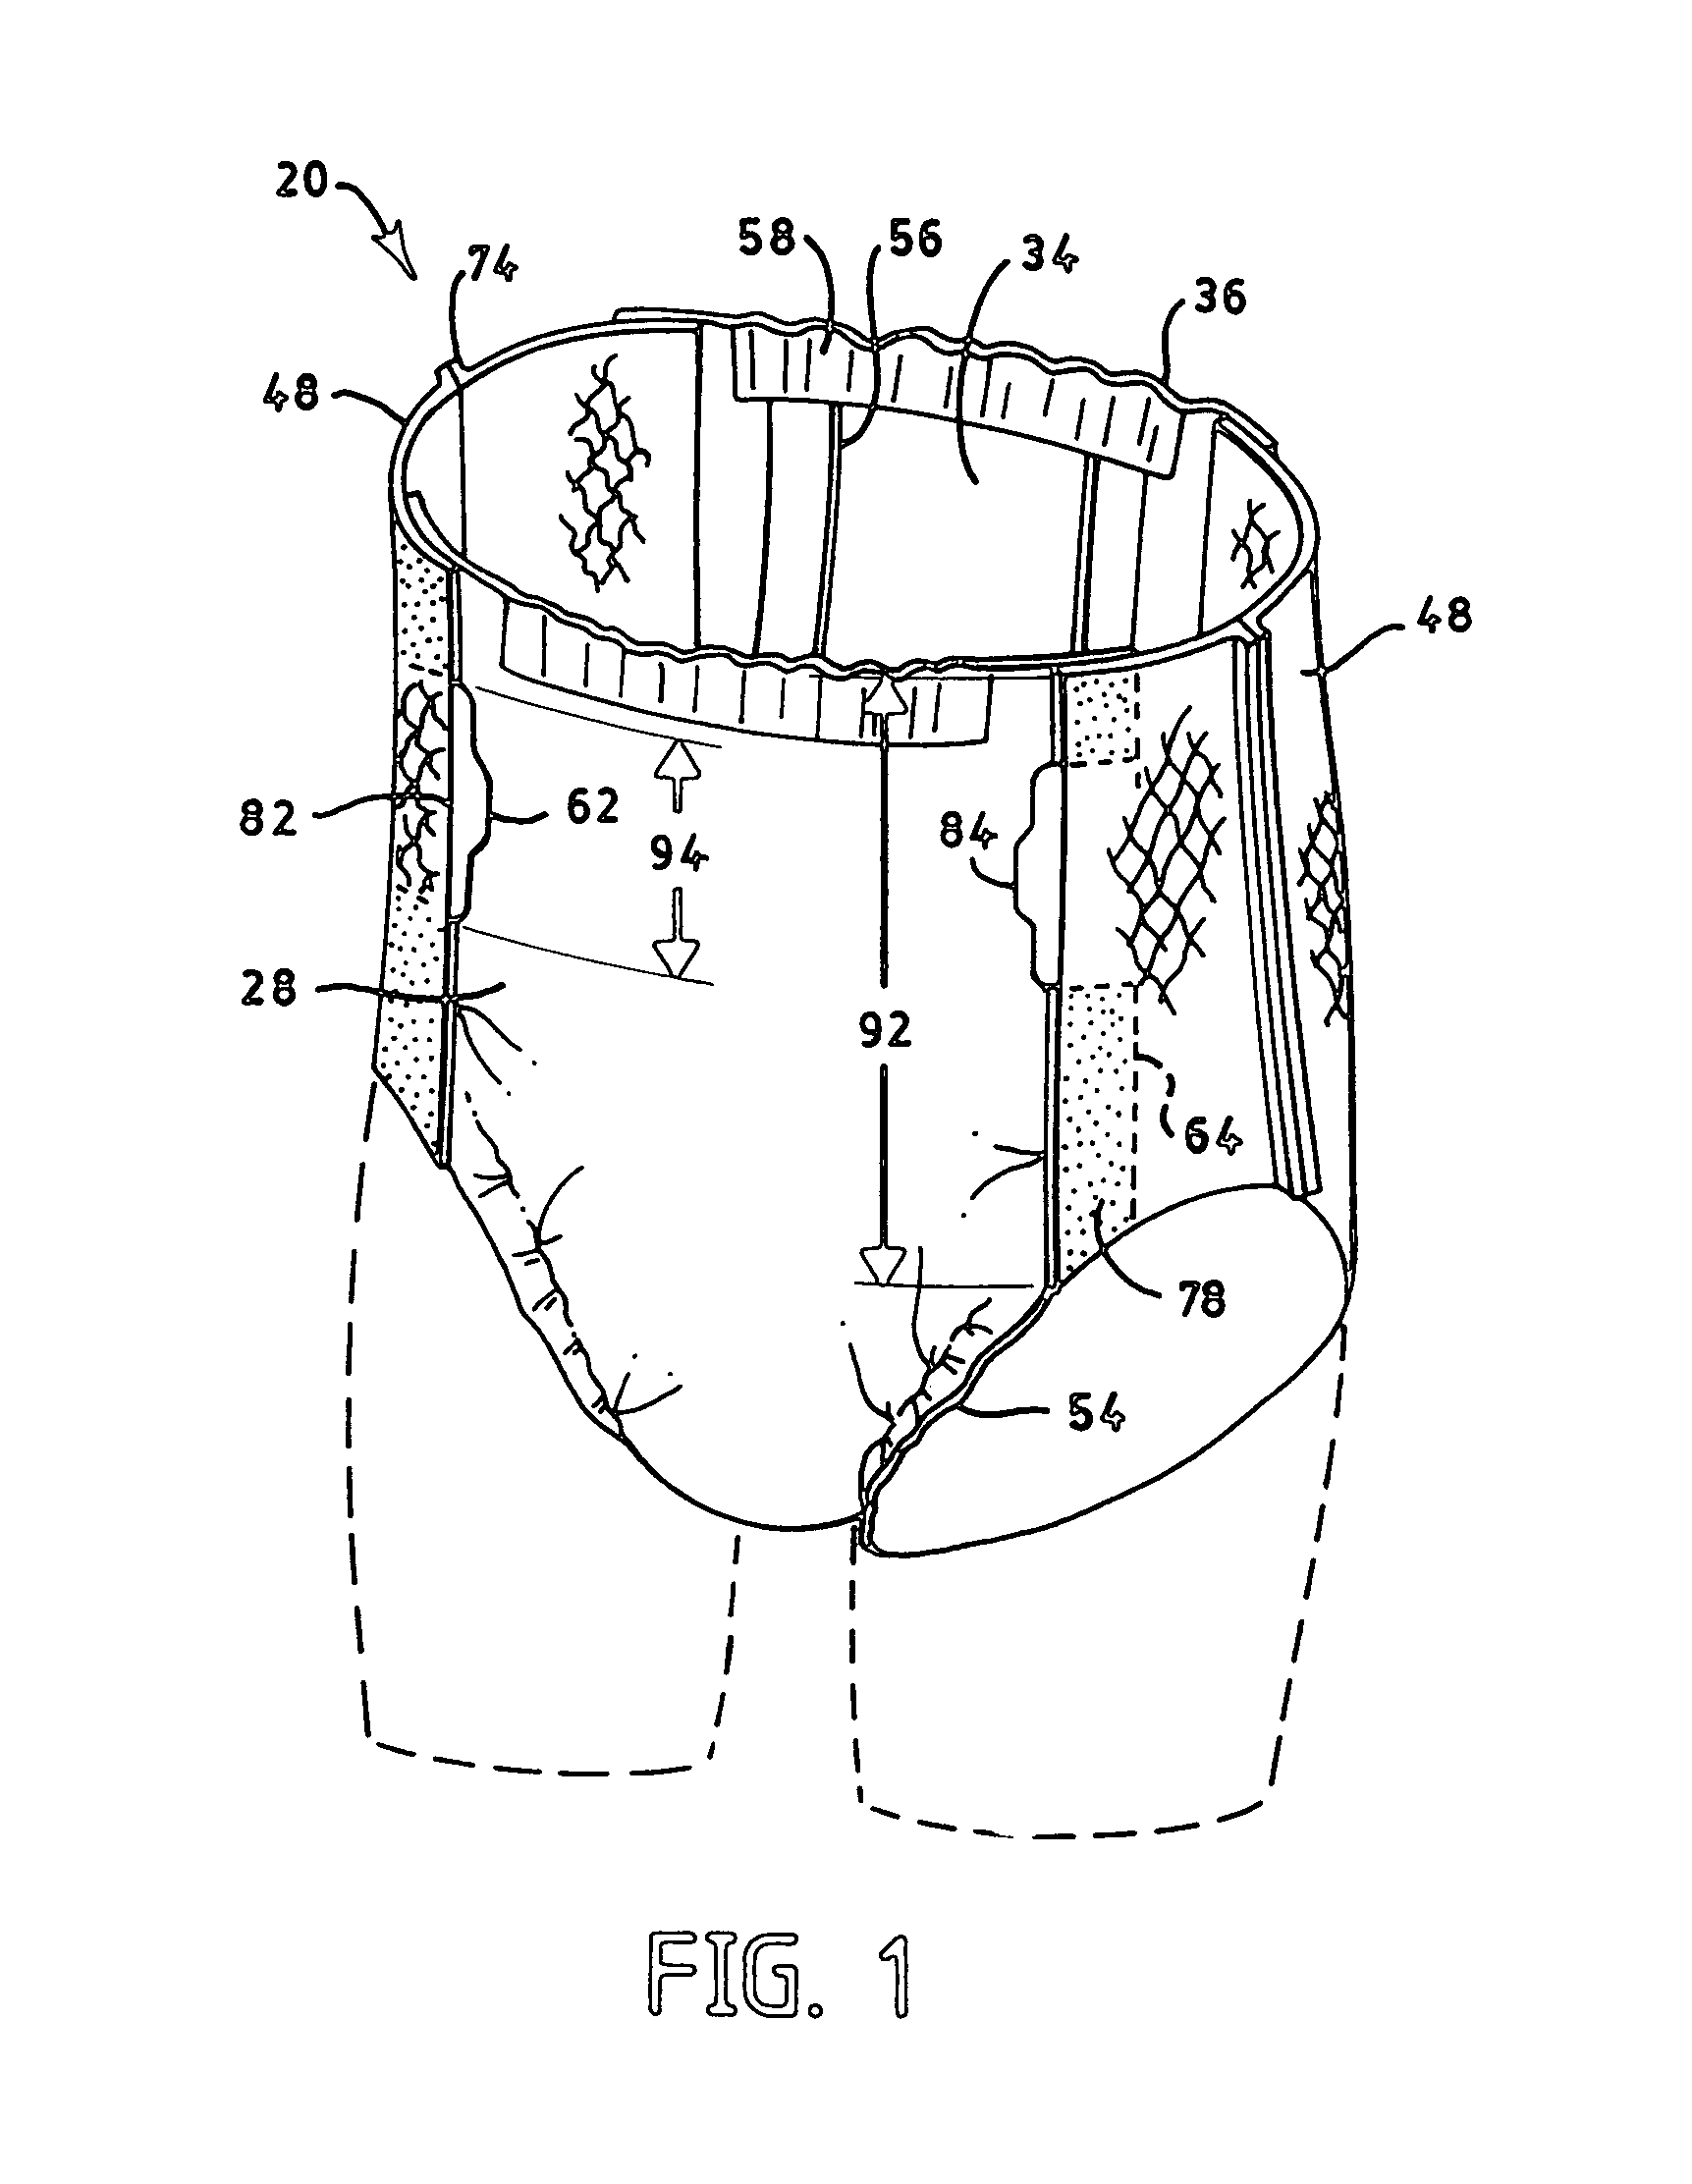 Pant-like disposable absorbent articles